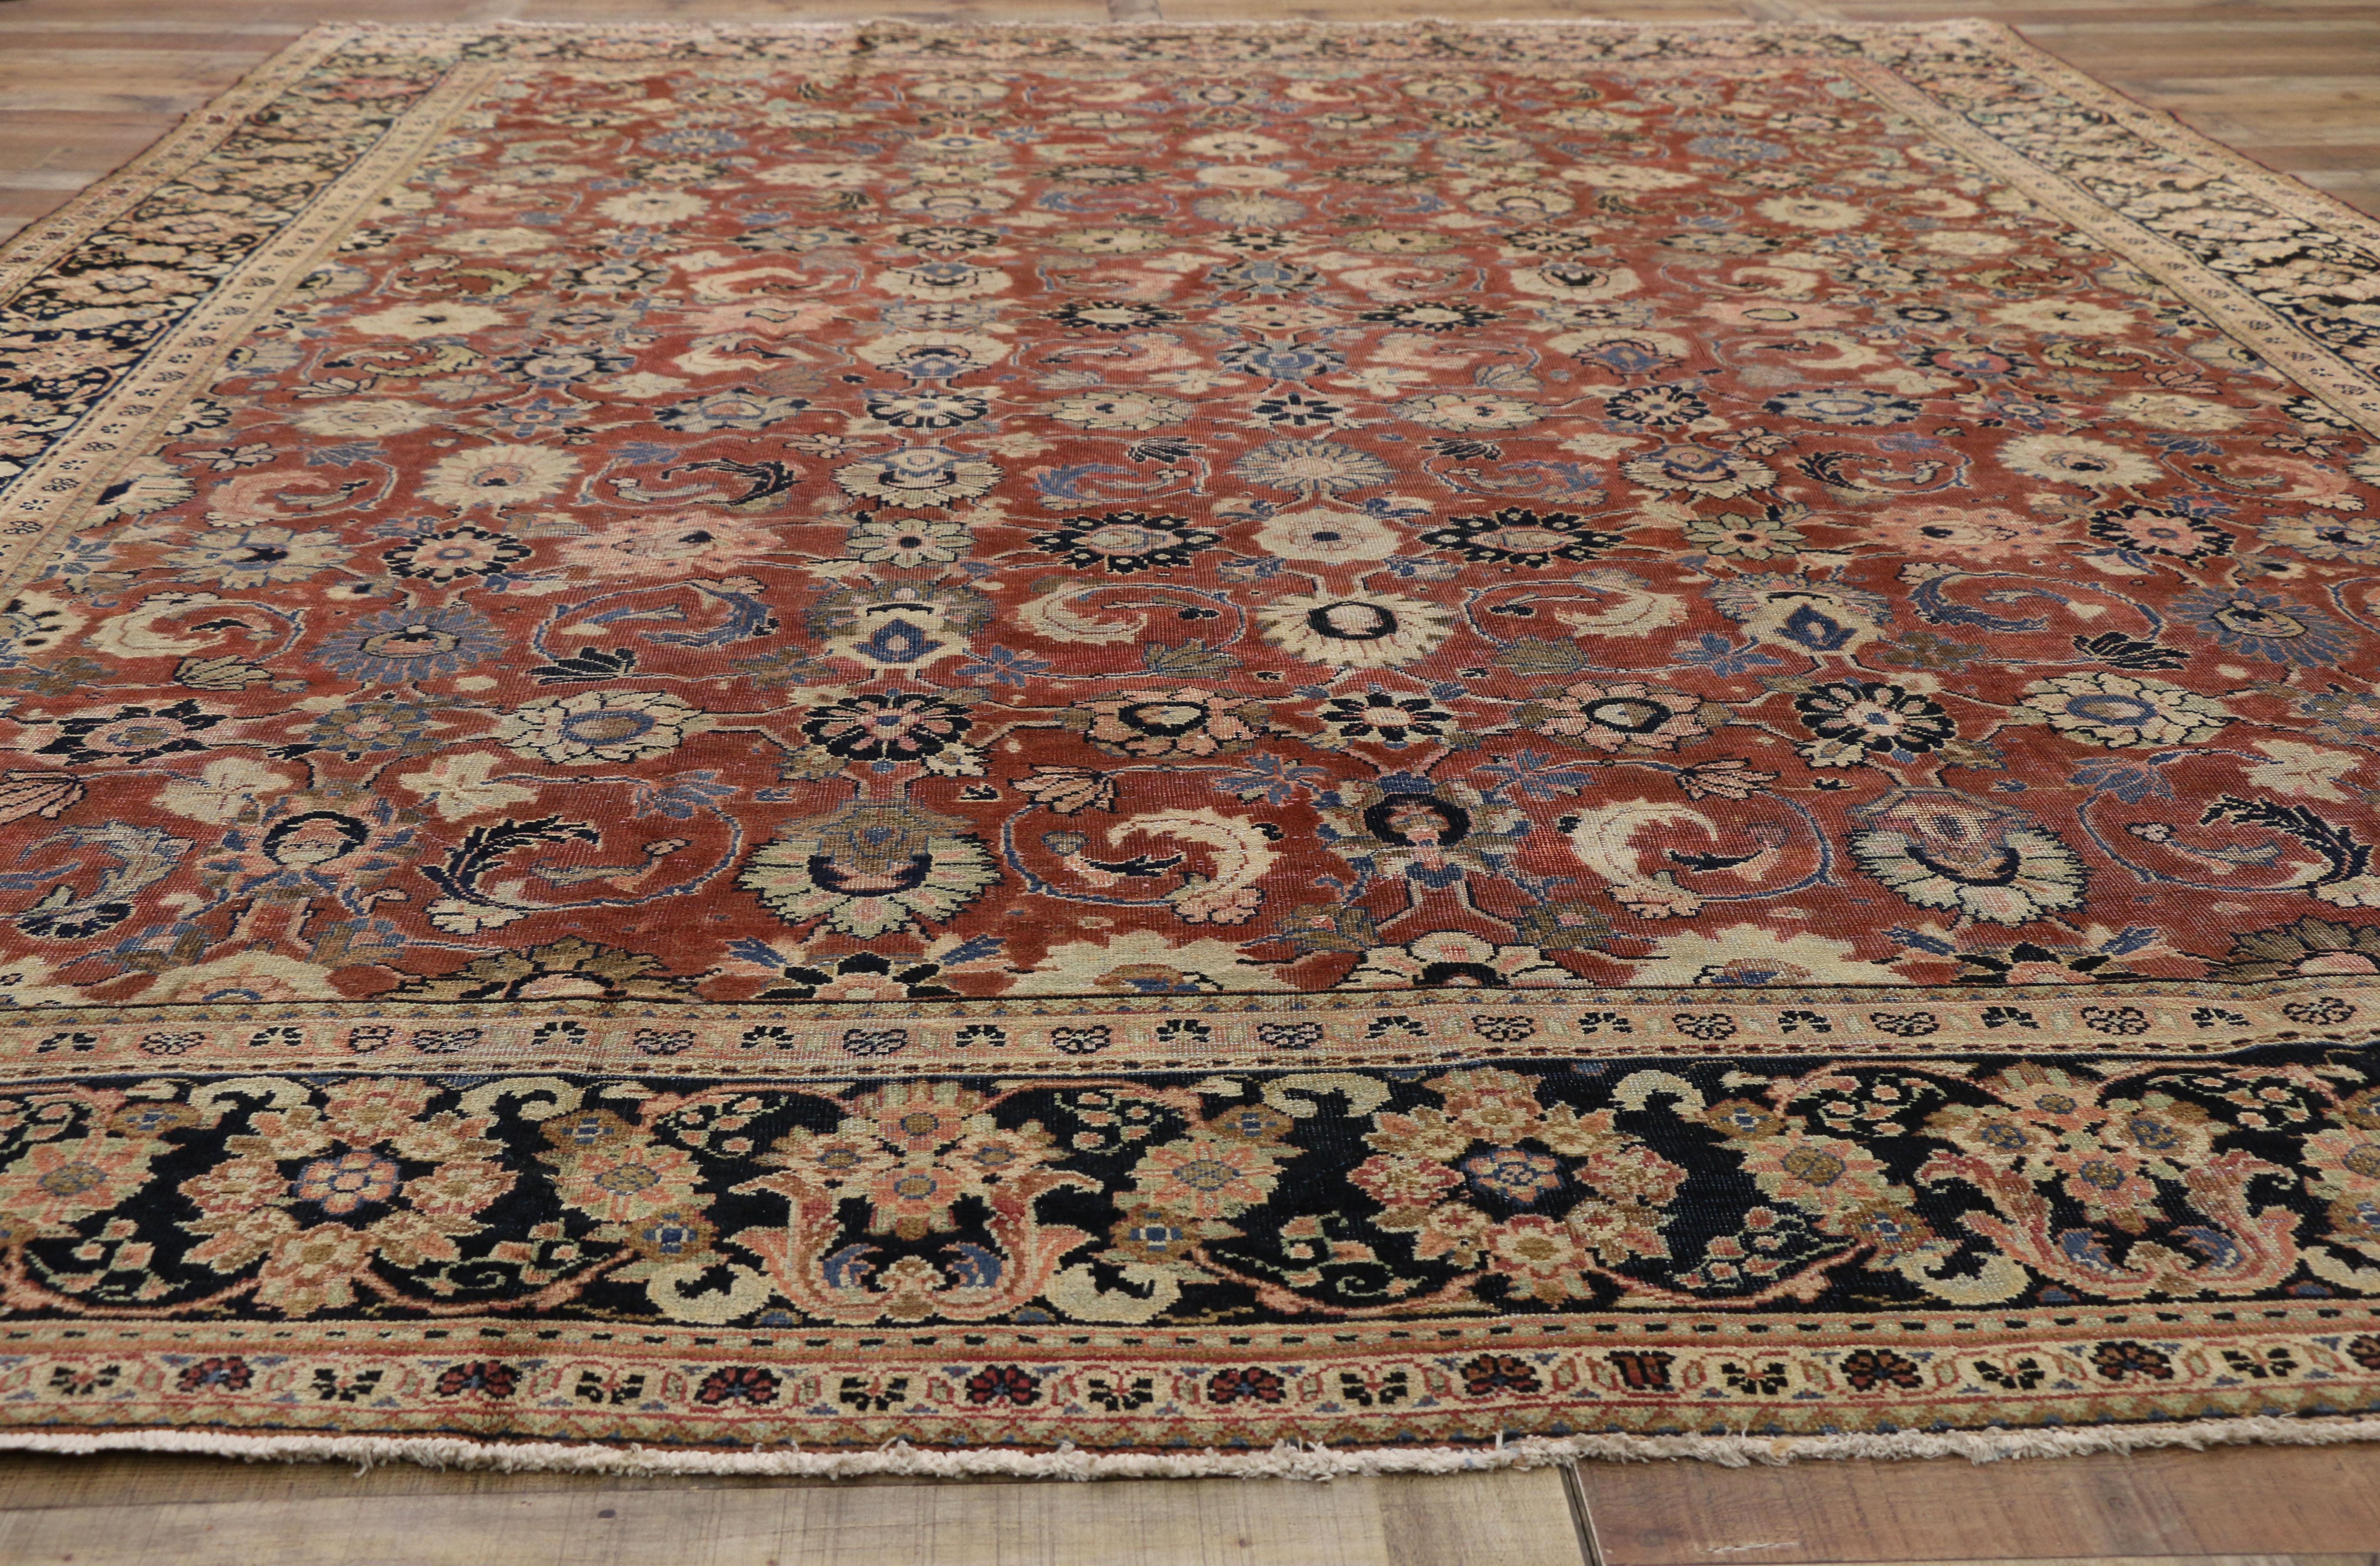 Vintage Persian Mahal Area Rug with Traditional Colonial and Federal Style In Good Condition For Sale In Dallas, TX